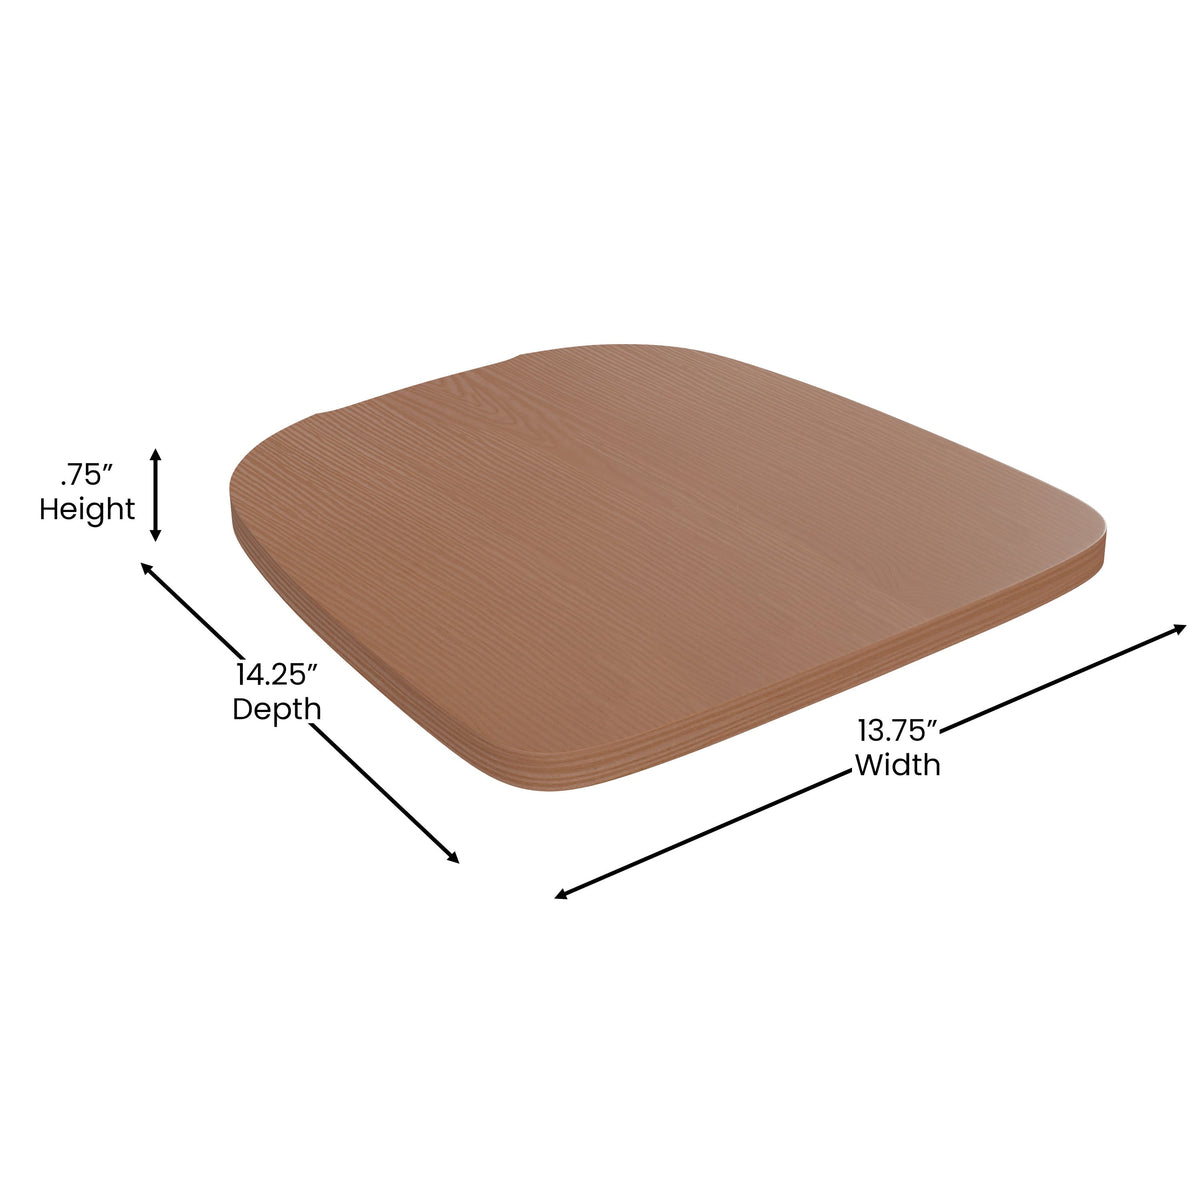 Teak |#| All-Weather Polystyrene Seat for Colorful Metal Stools and Chairs - Teak